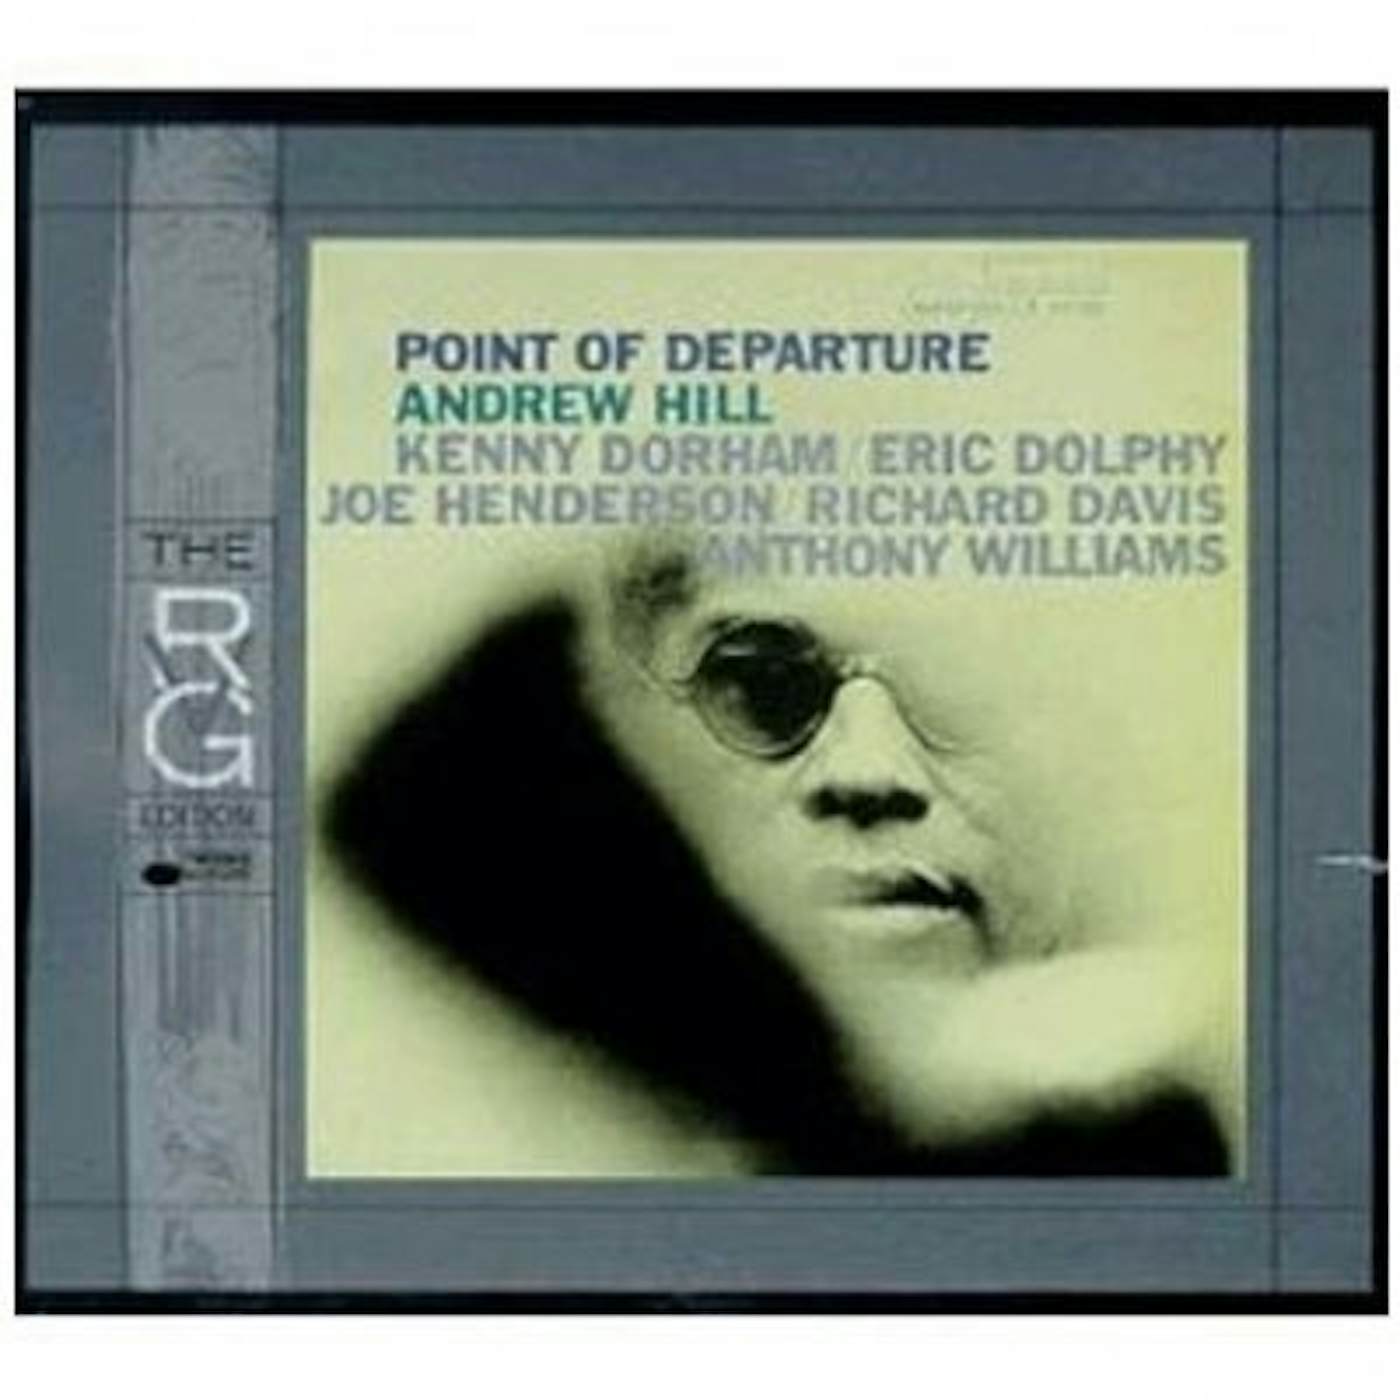 Andrew Hill POINT OF DEPARTURE CD